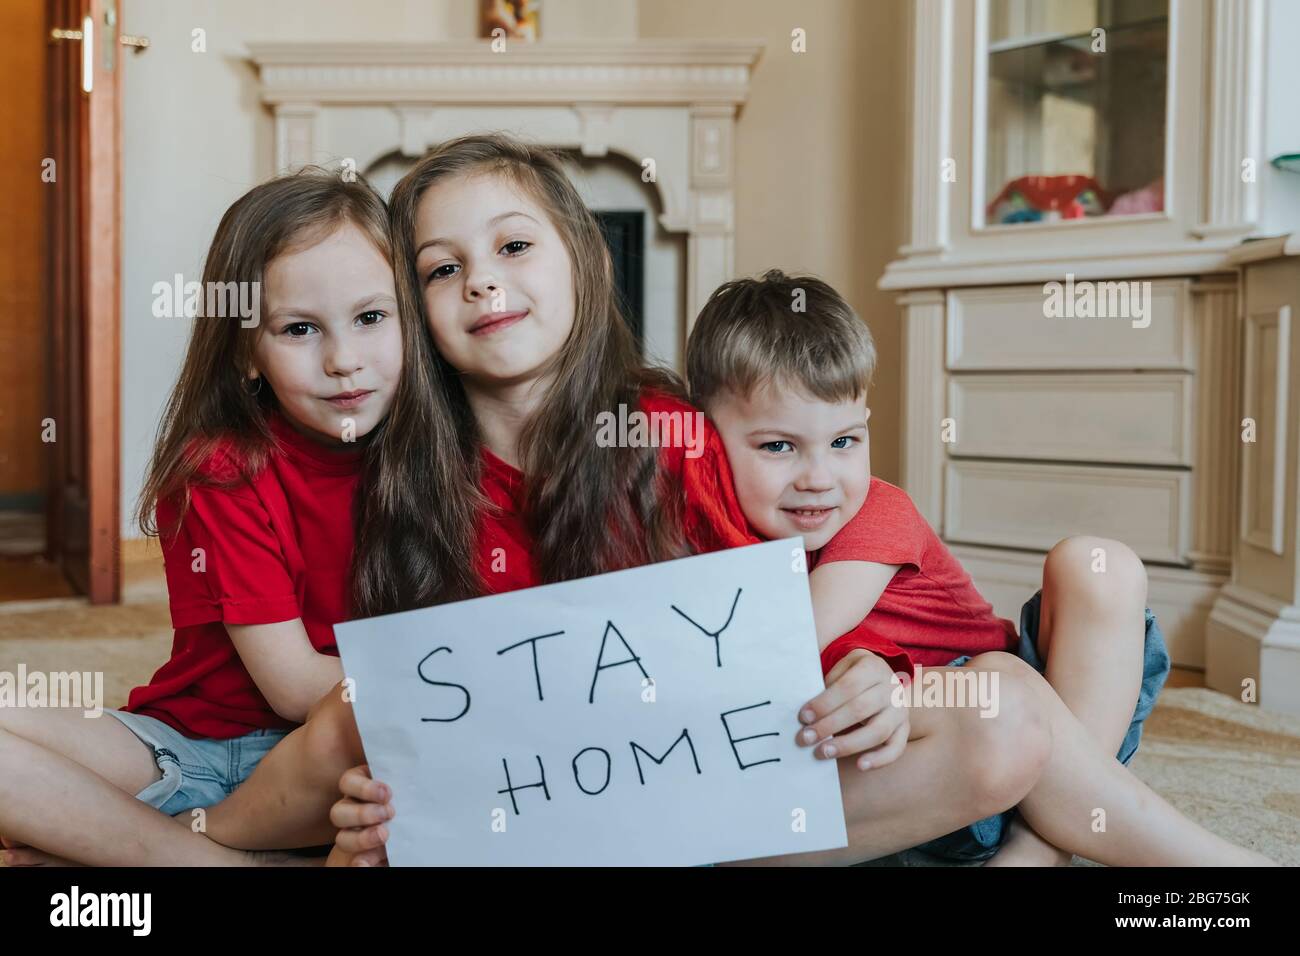 Family stay at home concept. Three children holding sign saying stay at home for virus protection and take care of their health from COVID-19 Stock Photo